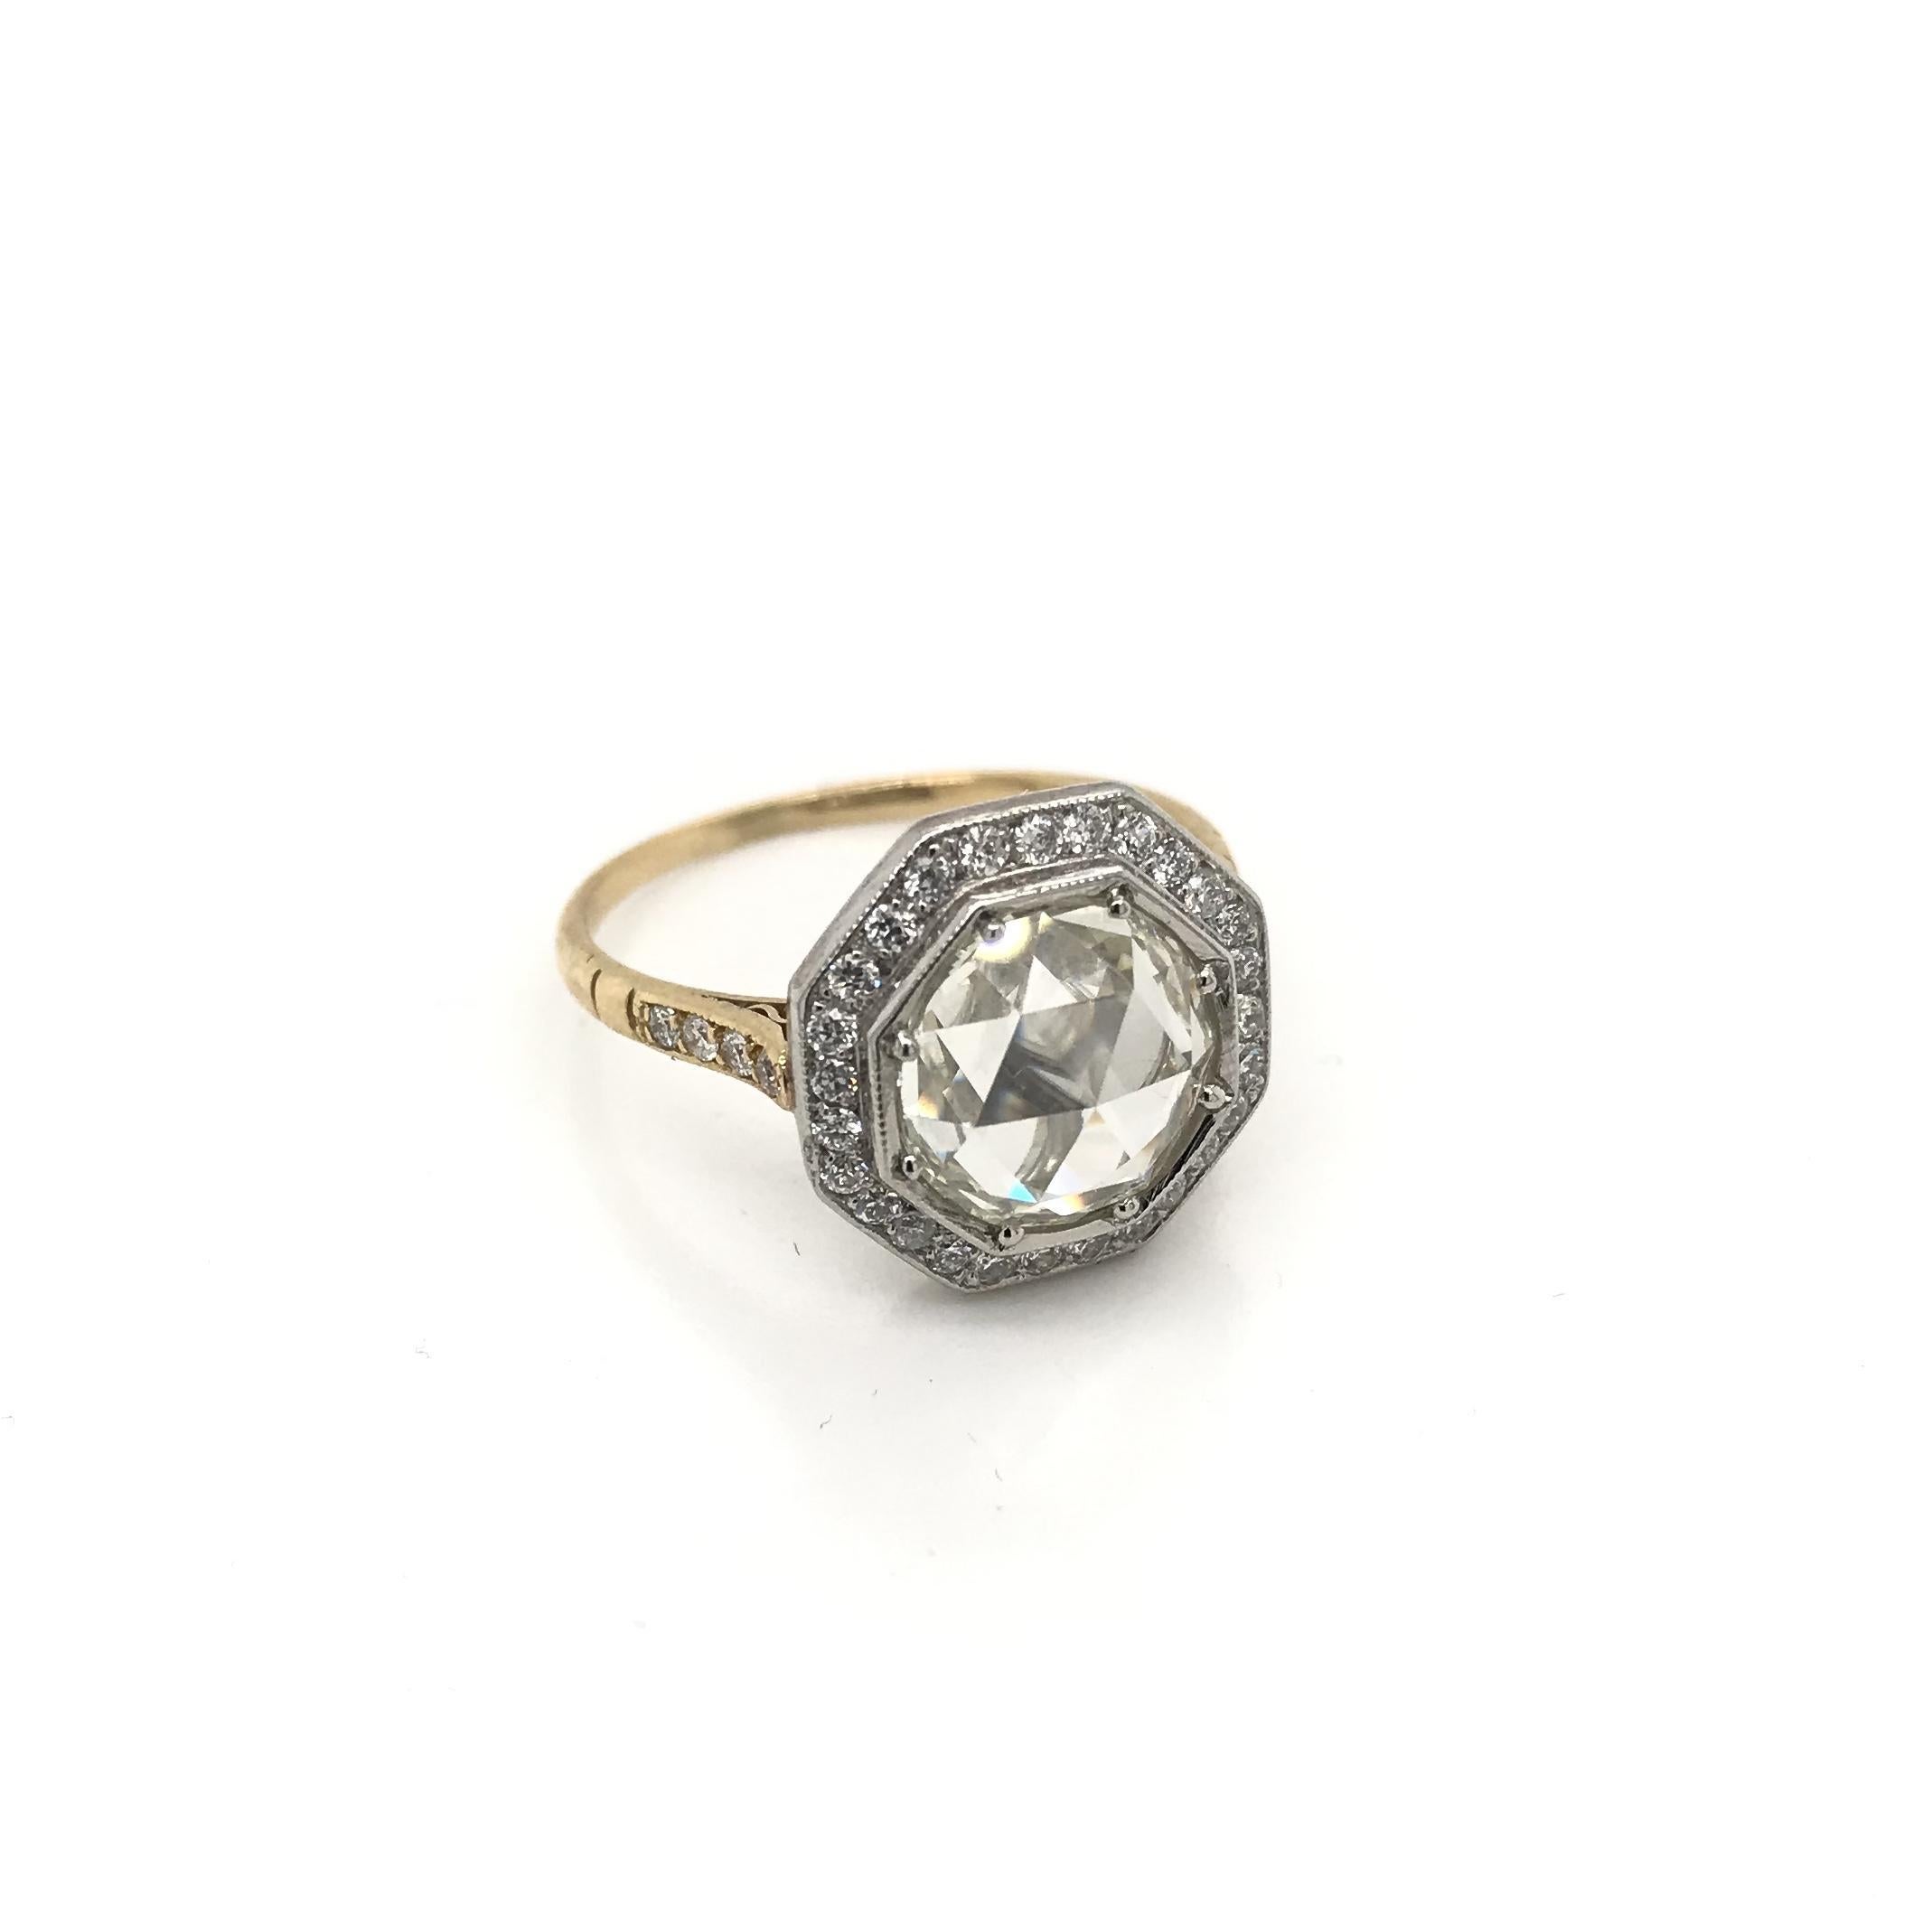 Contemporary Antique Inspired 2.63 Carat Rose Cut Diamond Ring For Sale 2